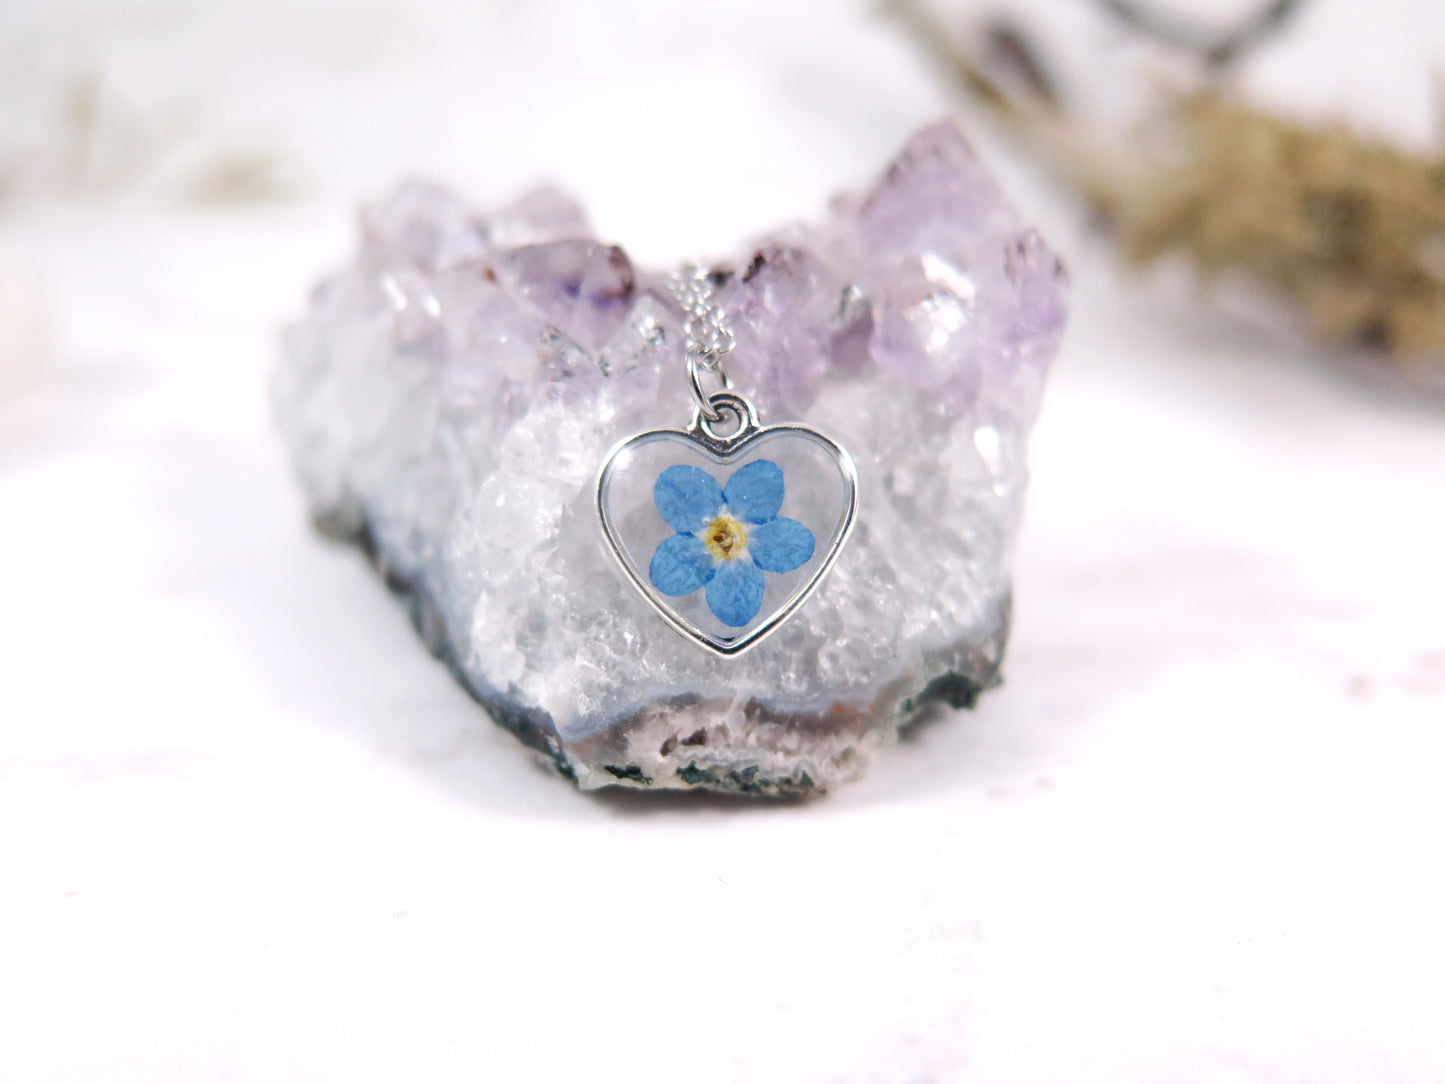 Forget me not flower heart shape necklace